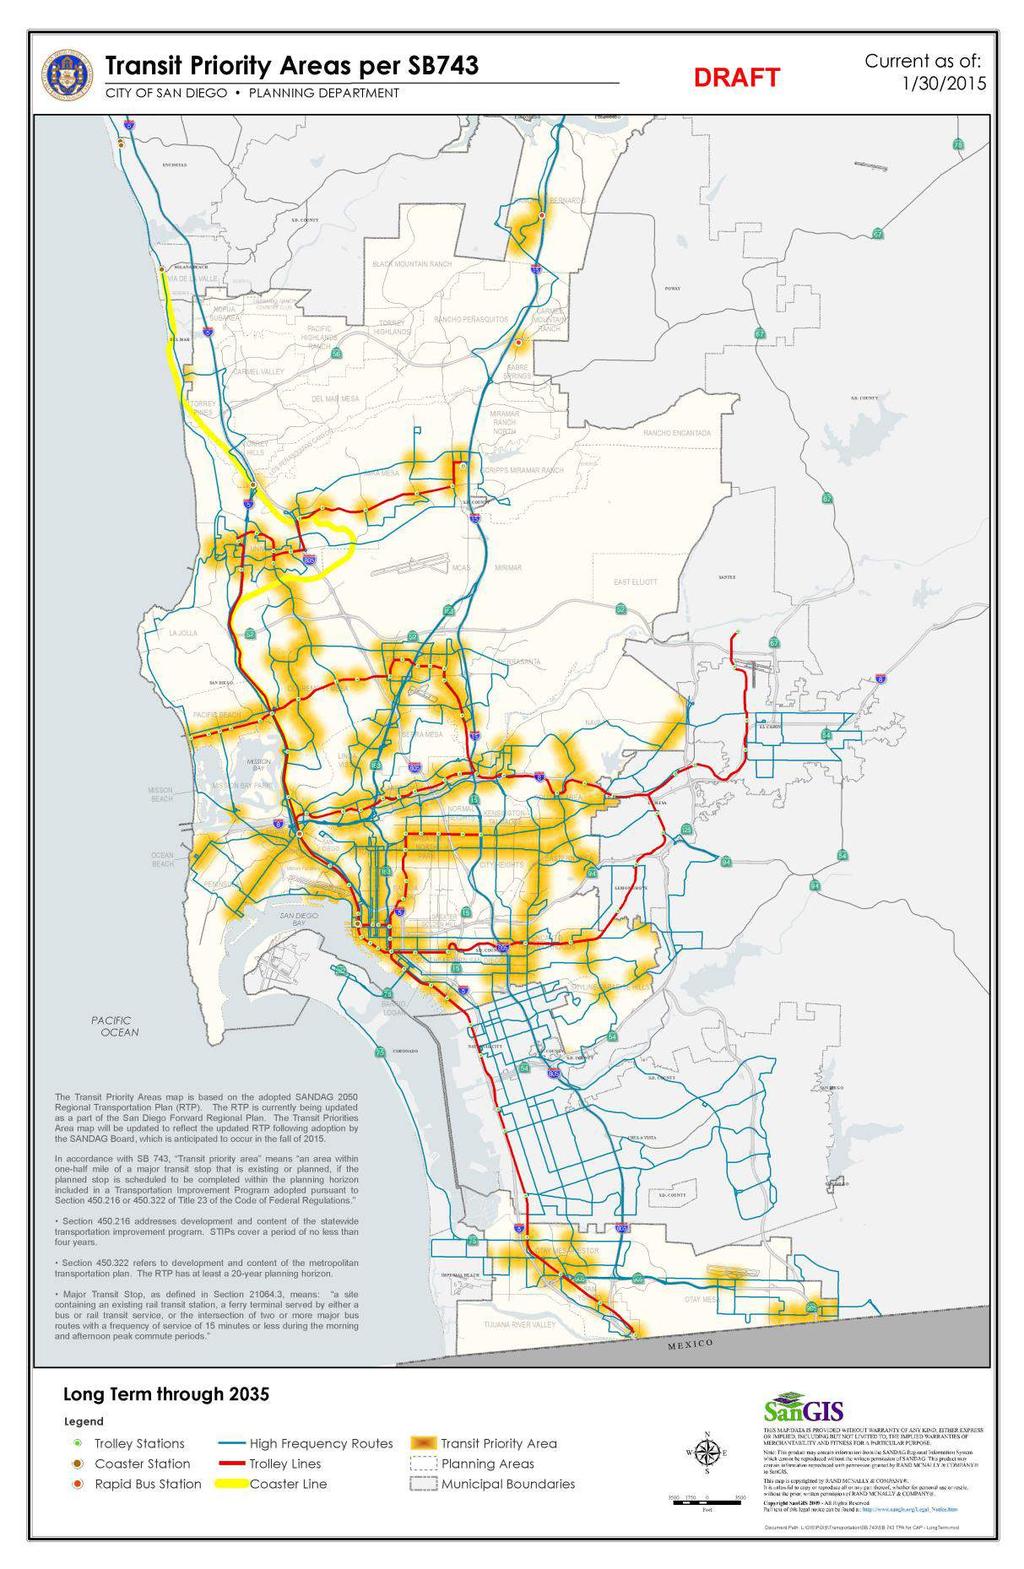 12 N e w C l i m a t e f o r T r a n s p o r t a t i o n Appendix 2: This map displays the Transit Priority Areas used in the City of San Diego s Climate Action Plan.